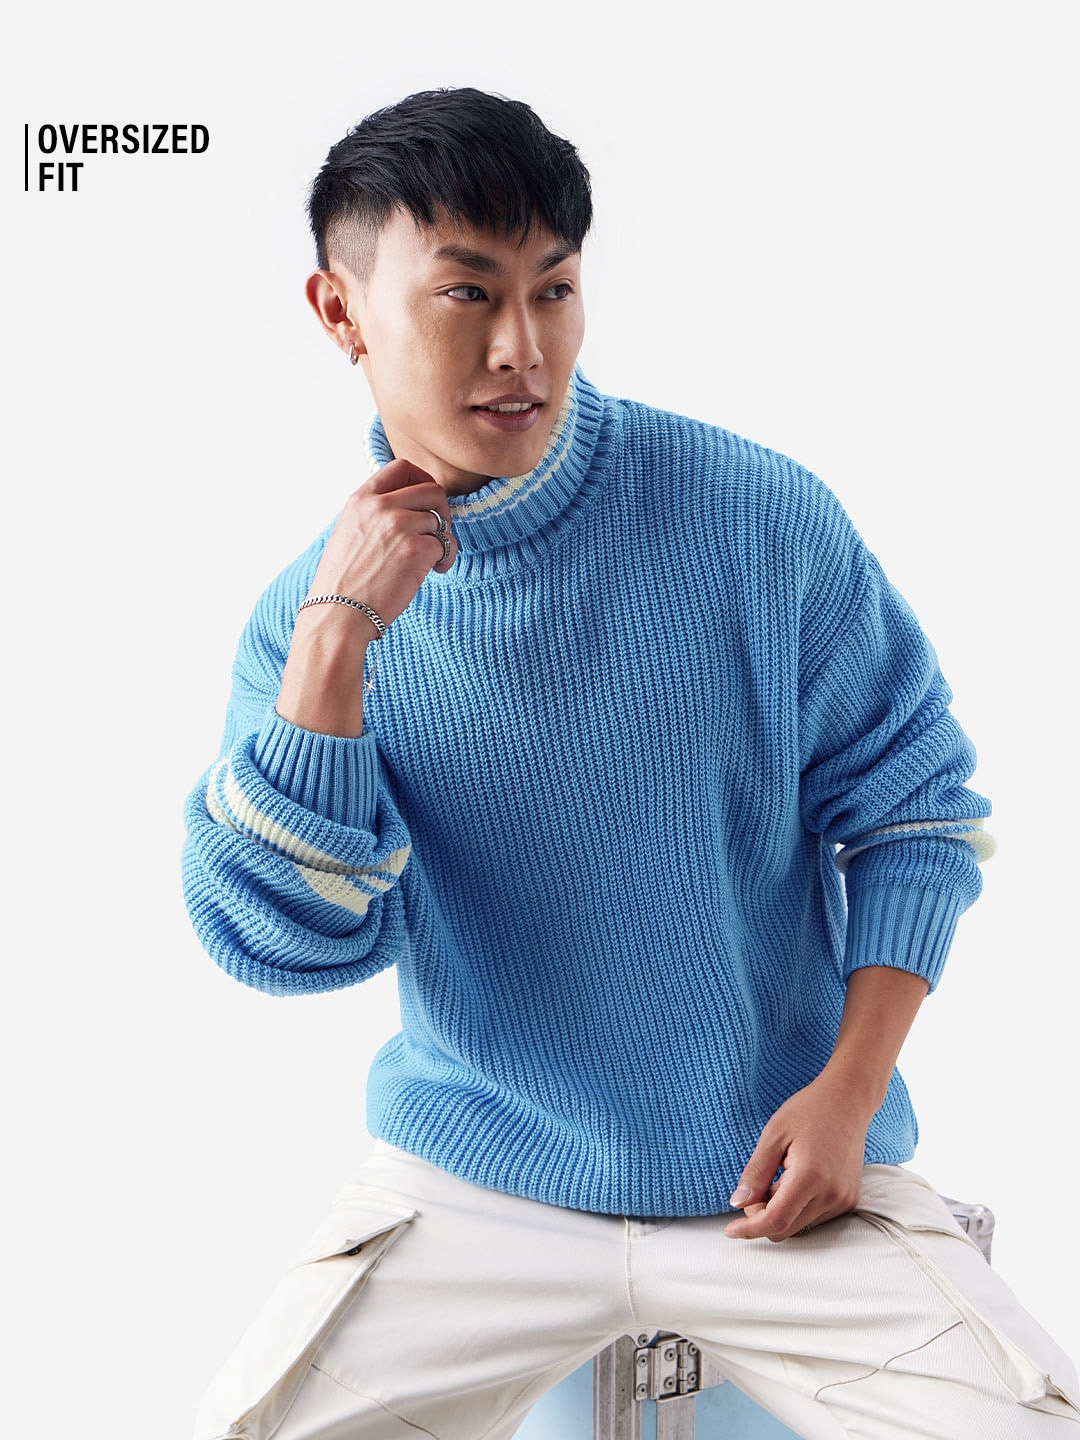 The Souled Store | Men's Solids: Powder Blue Pullovers